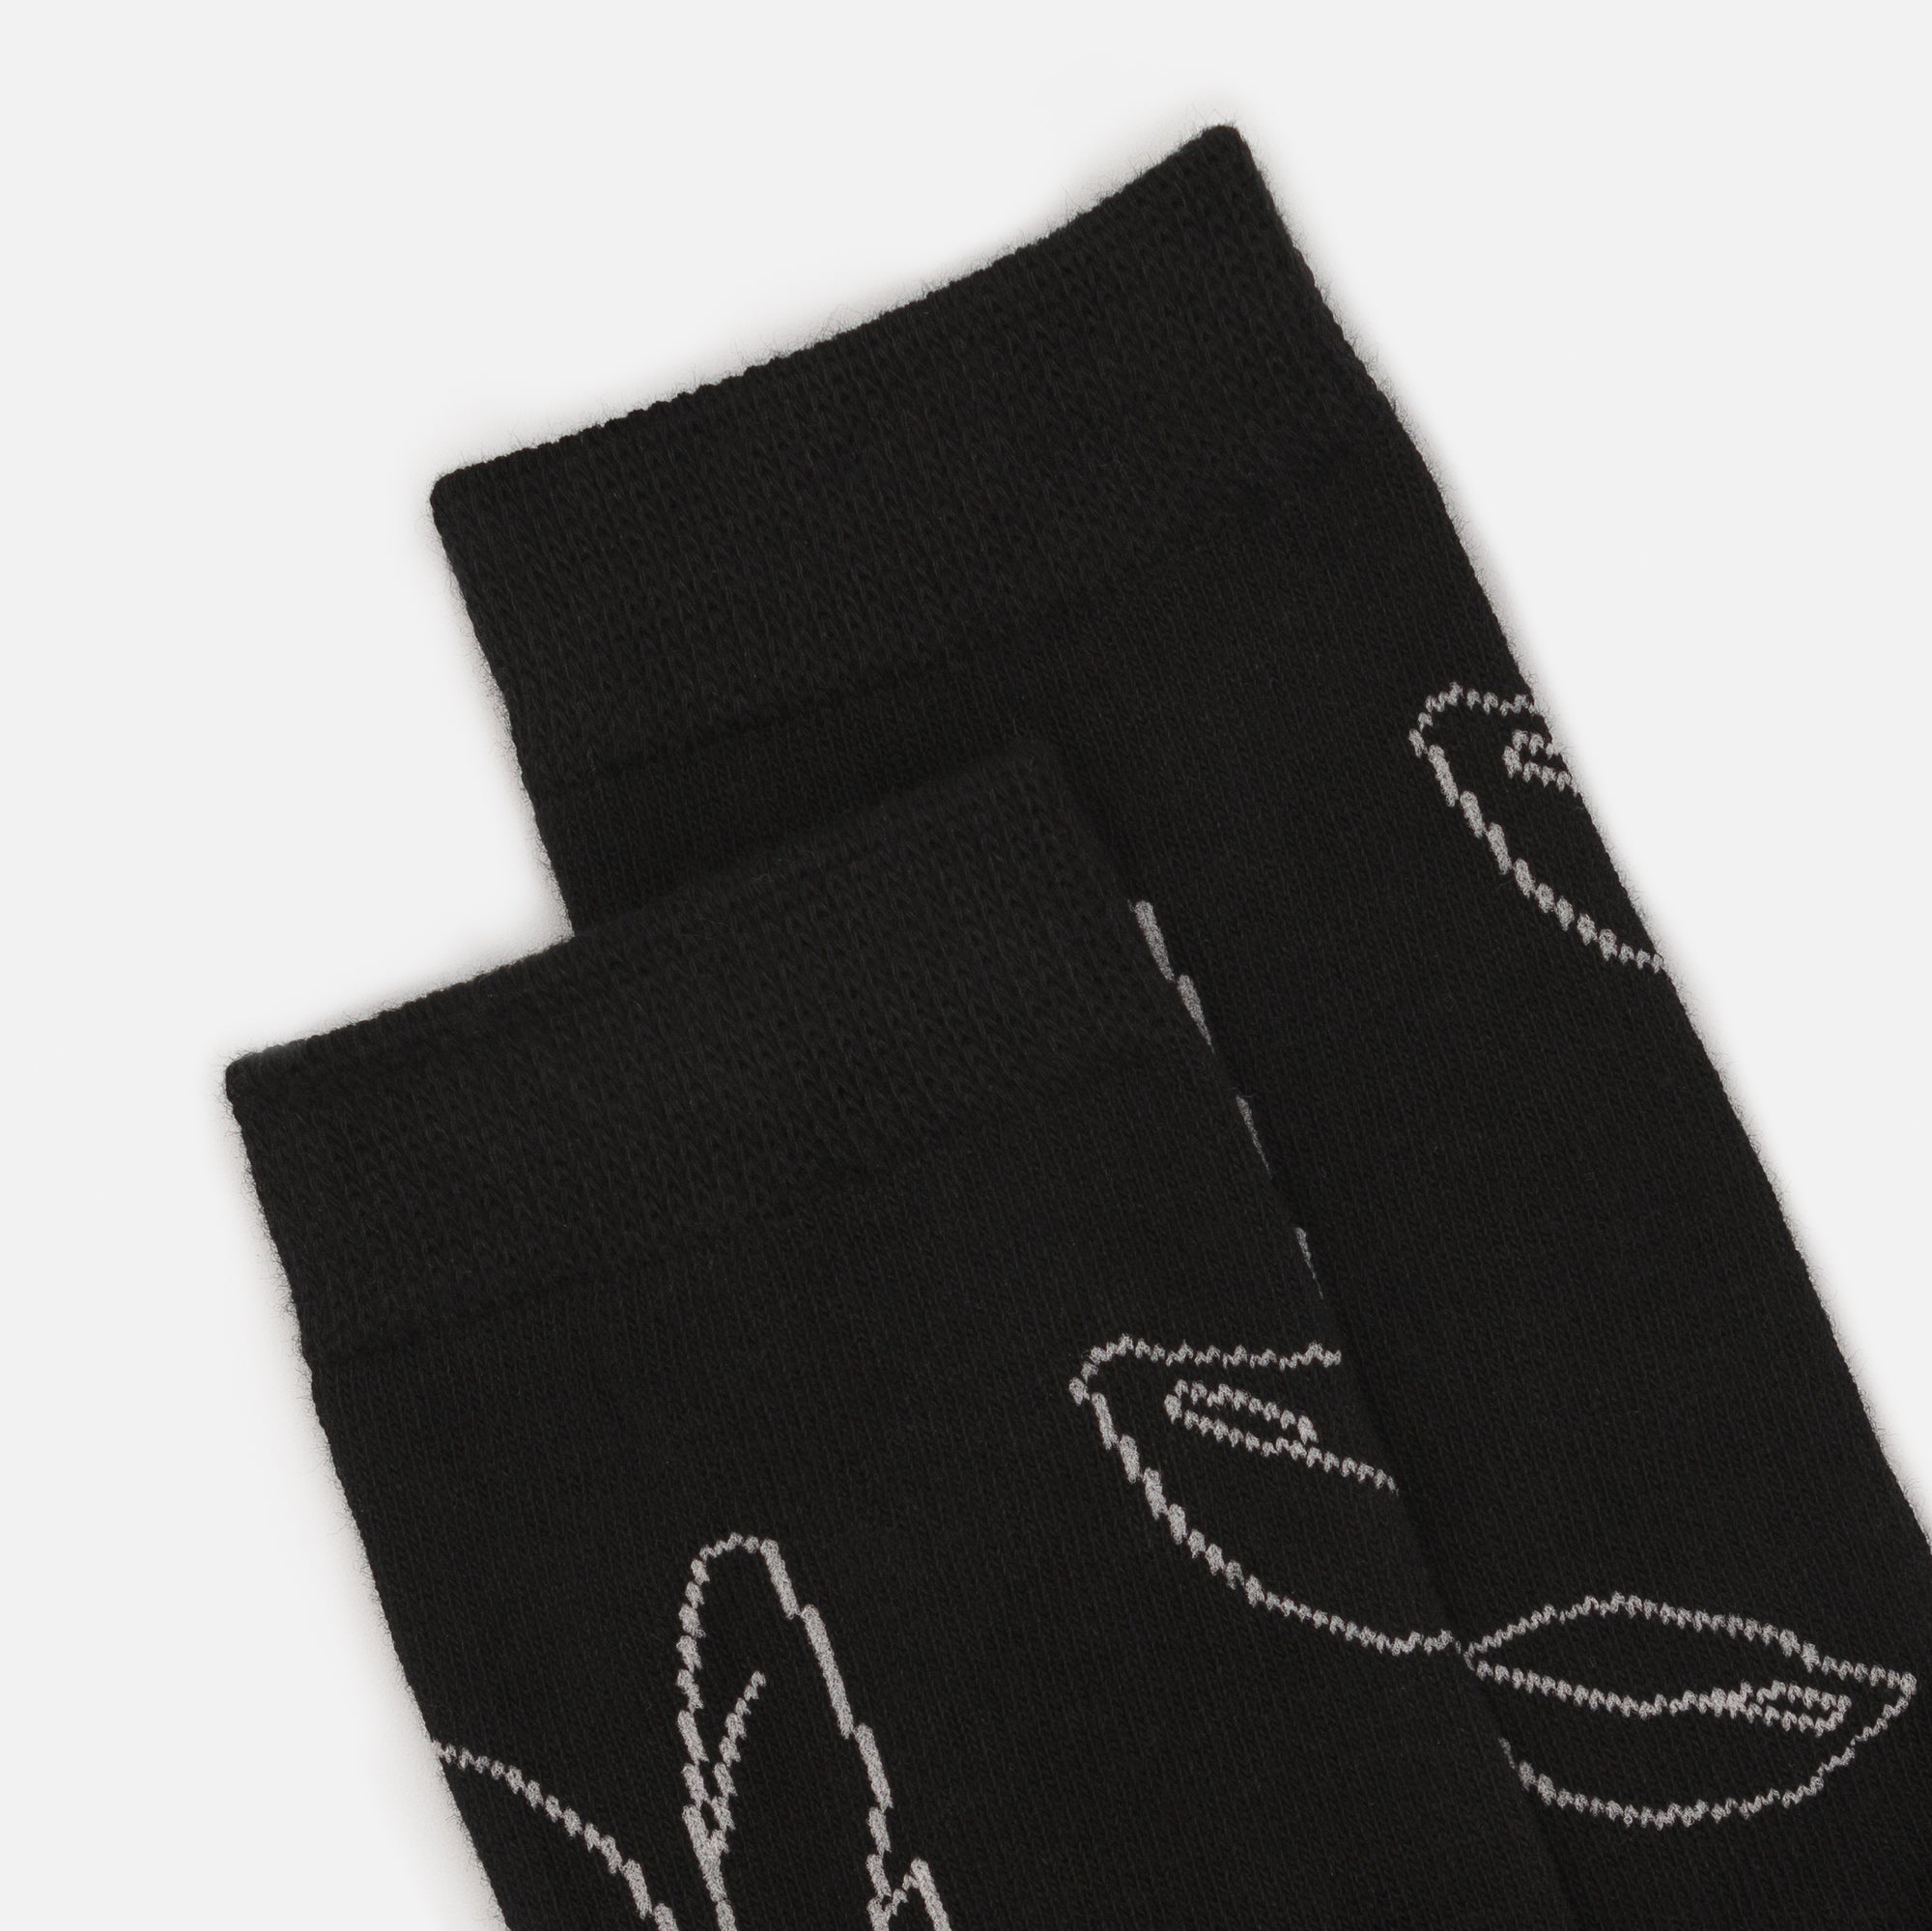 Black stockings with linear floral pattern